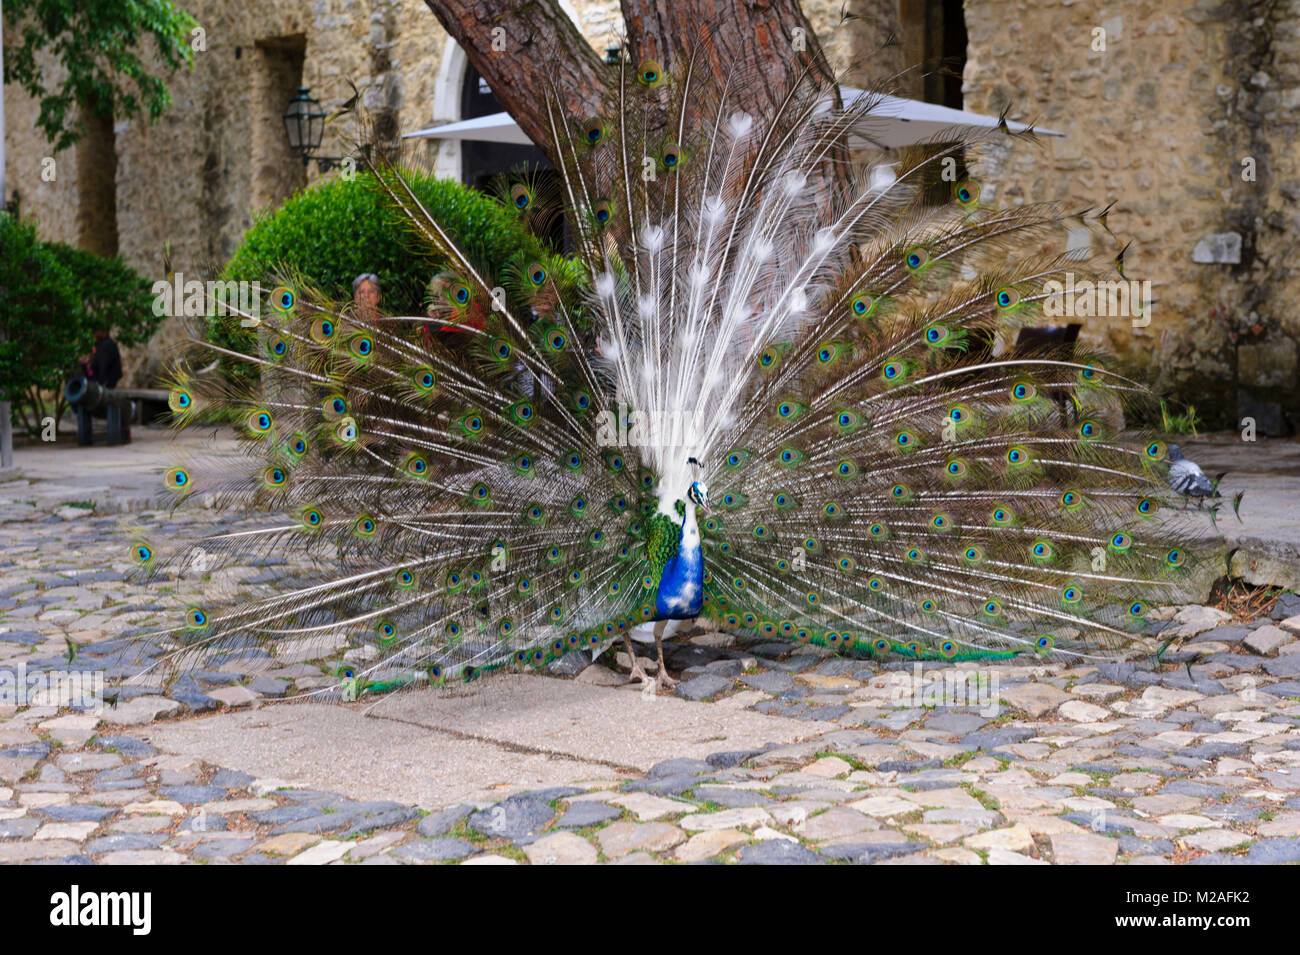 A peacock wondering on the grounds of Sao Jorge Castle, Lisbon, Portugal Stock Photo